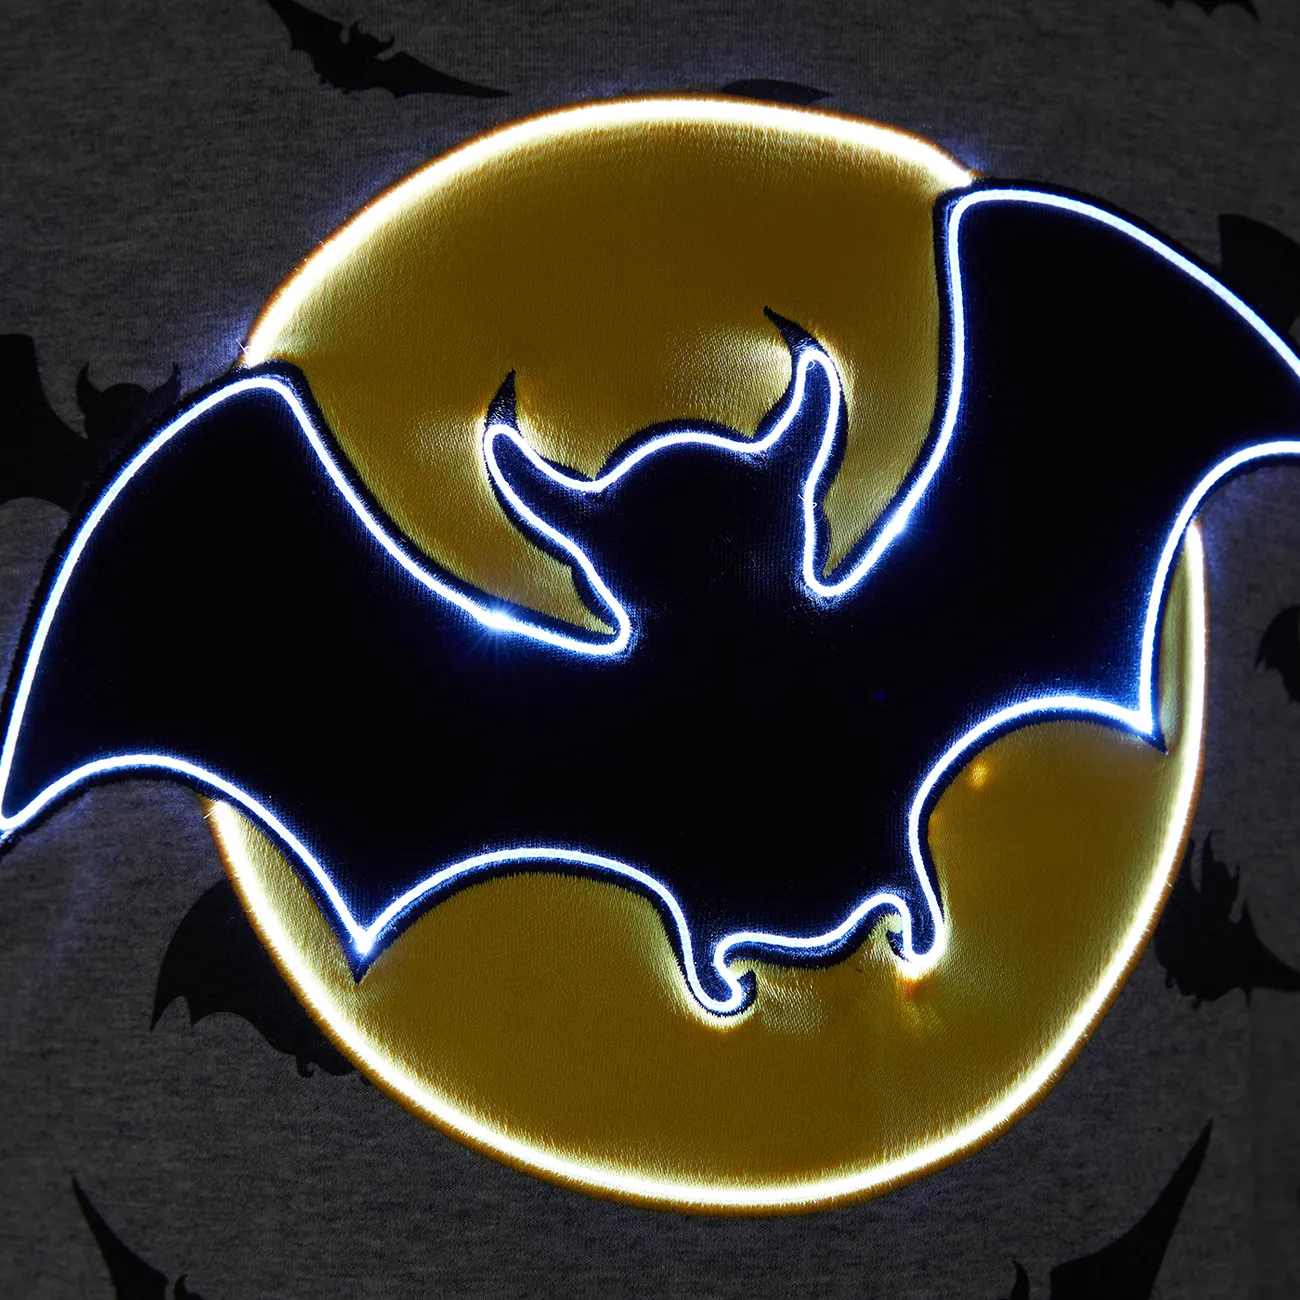 Go-Glow Illuminating Sweatshirt with Light Up Bat Pattern Including Controller (Built-In Battery) Grey big image 1